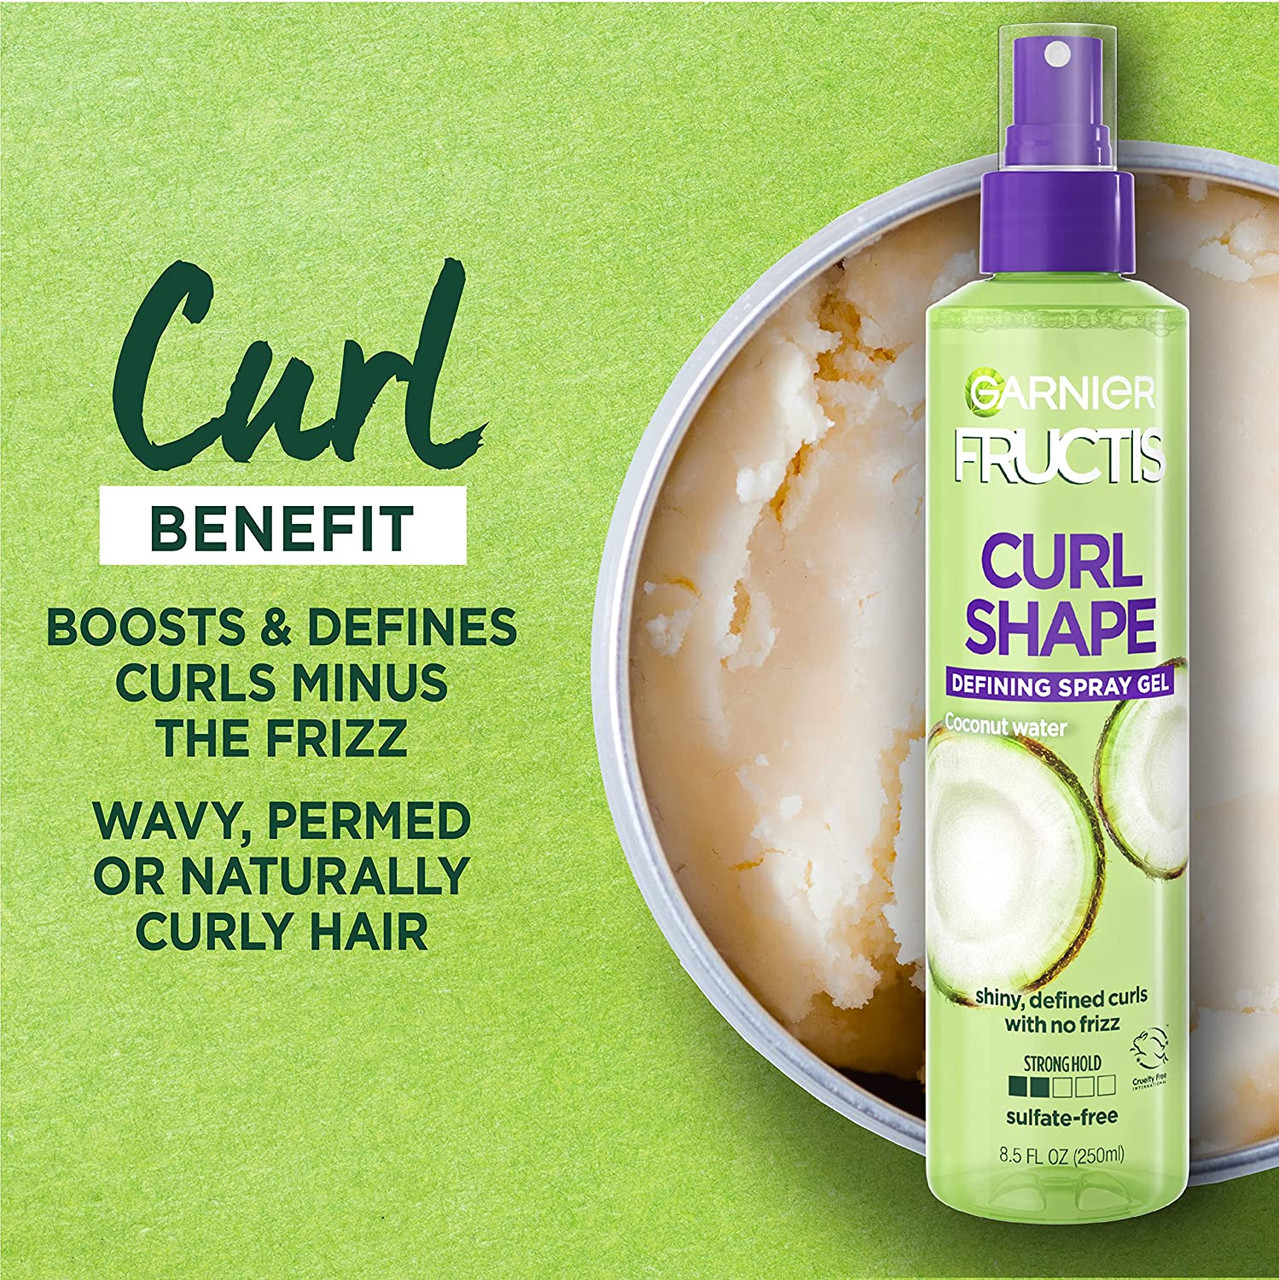 Garnier Fructis Curl Shape - Natural Gel, Spray And Whole Defining Coconut oz 8.5 Water